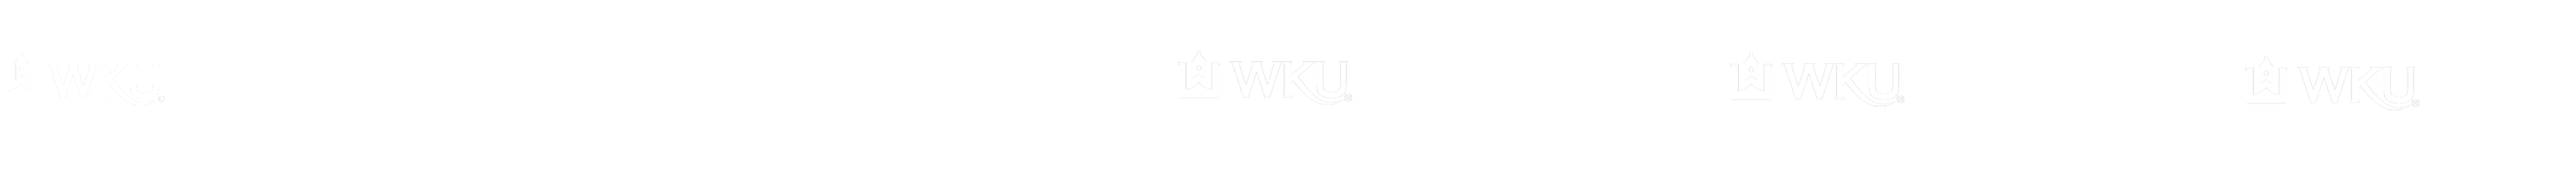 Completed Projects – WKU XR Lab